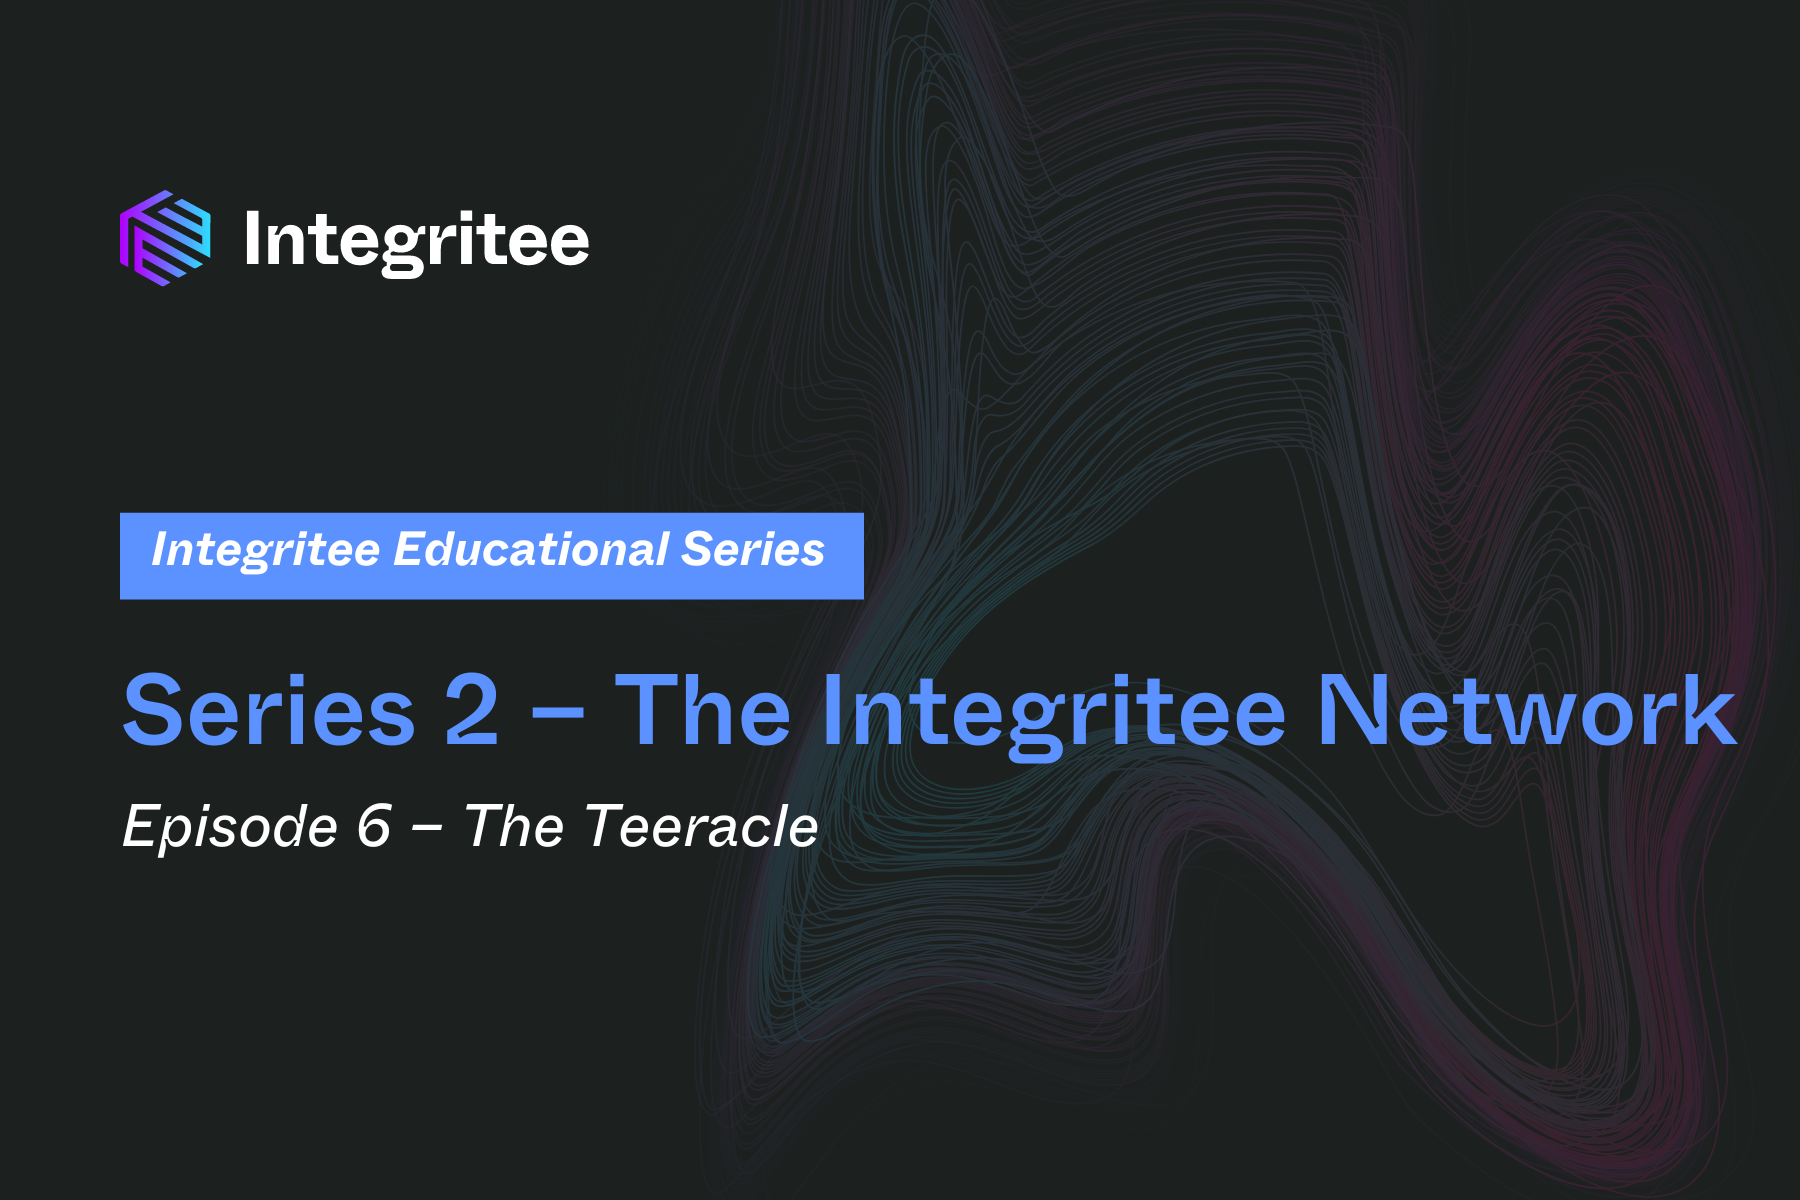 Series 2 – The Integritee Network | Episode 6 – The Teeracle